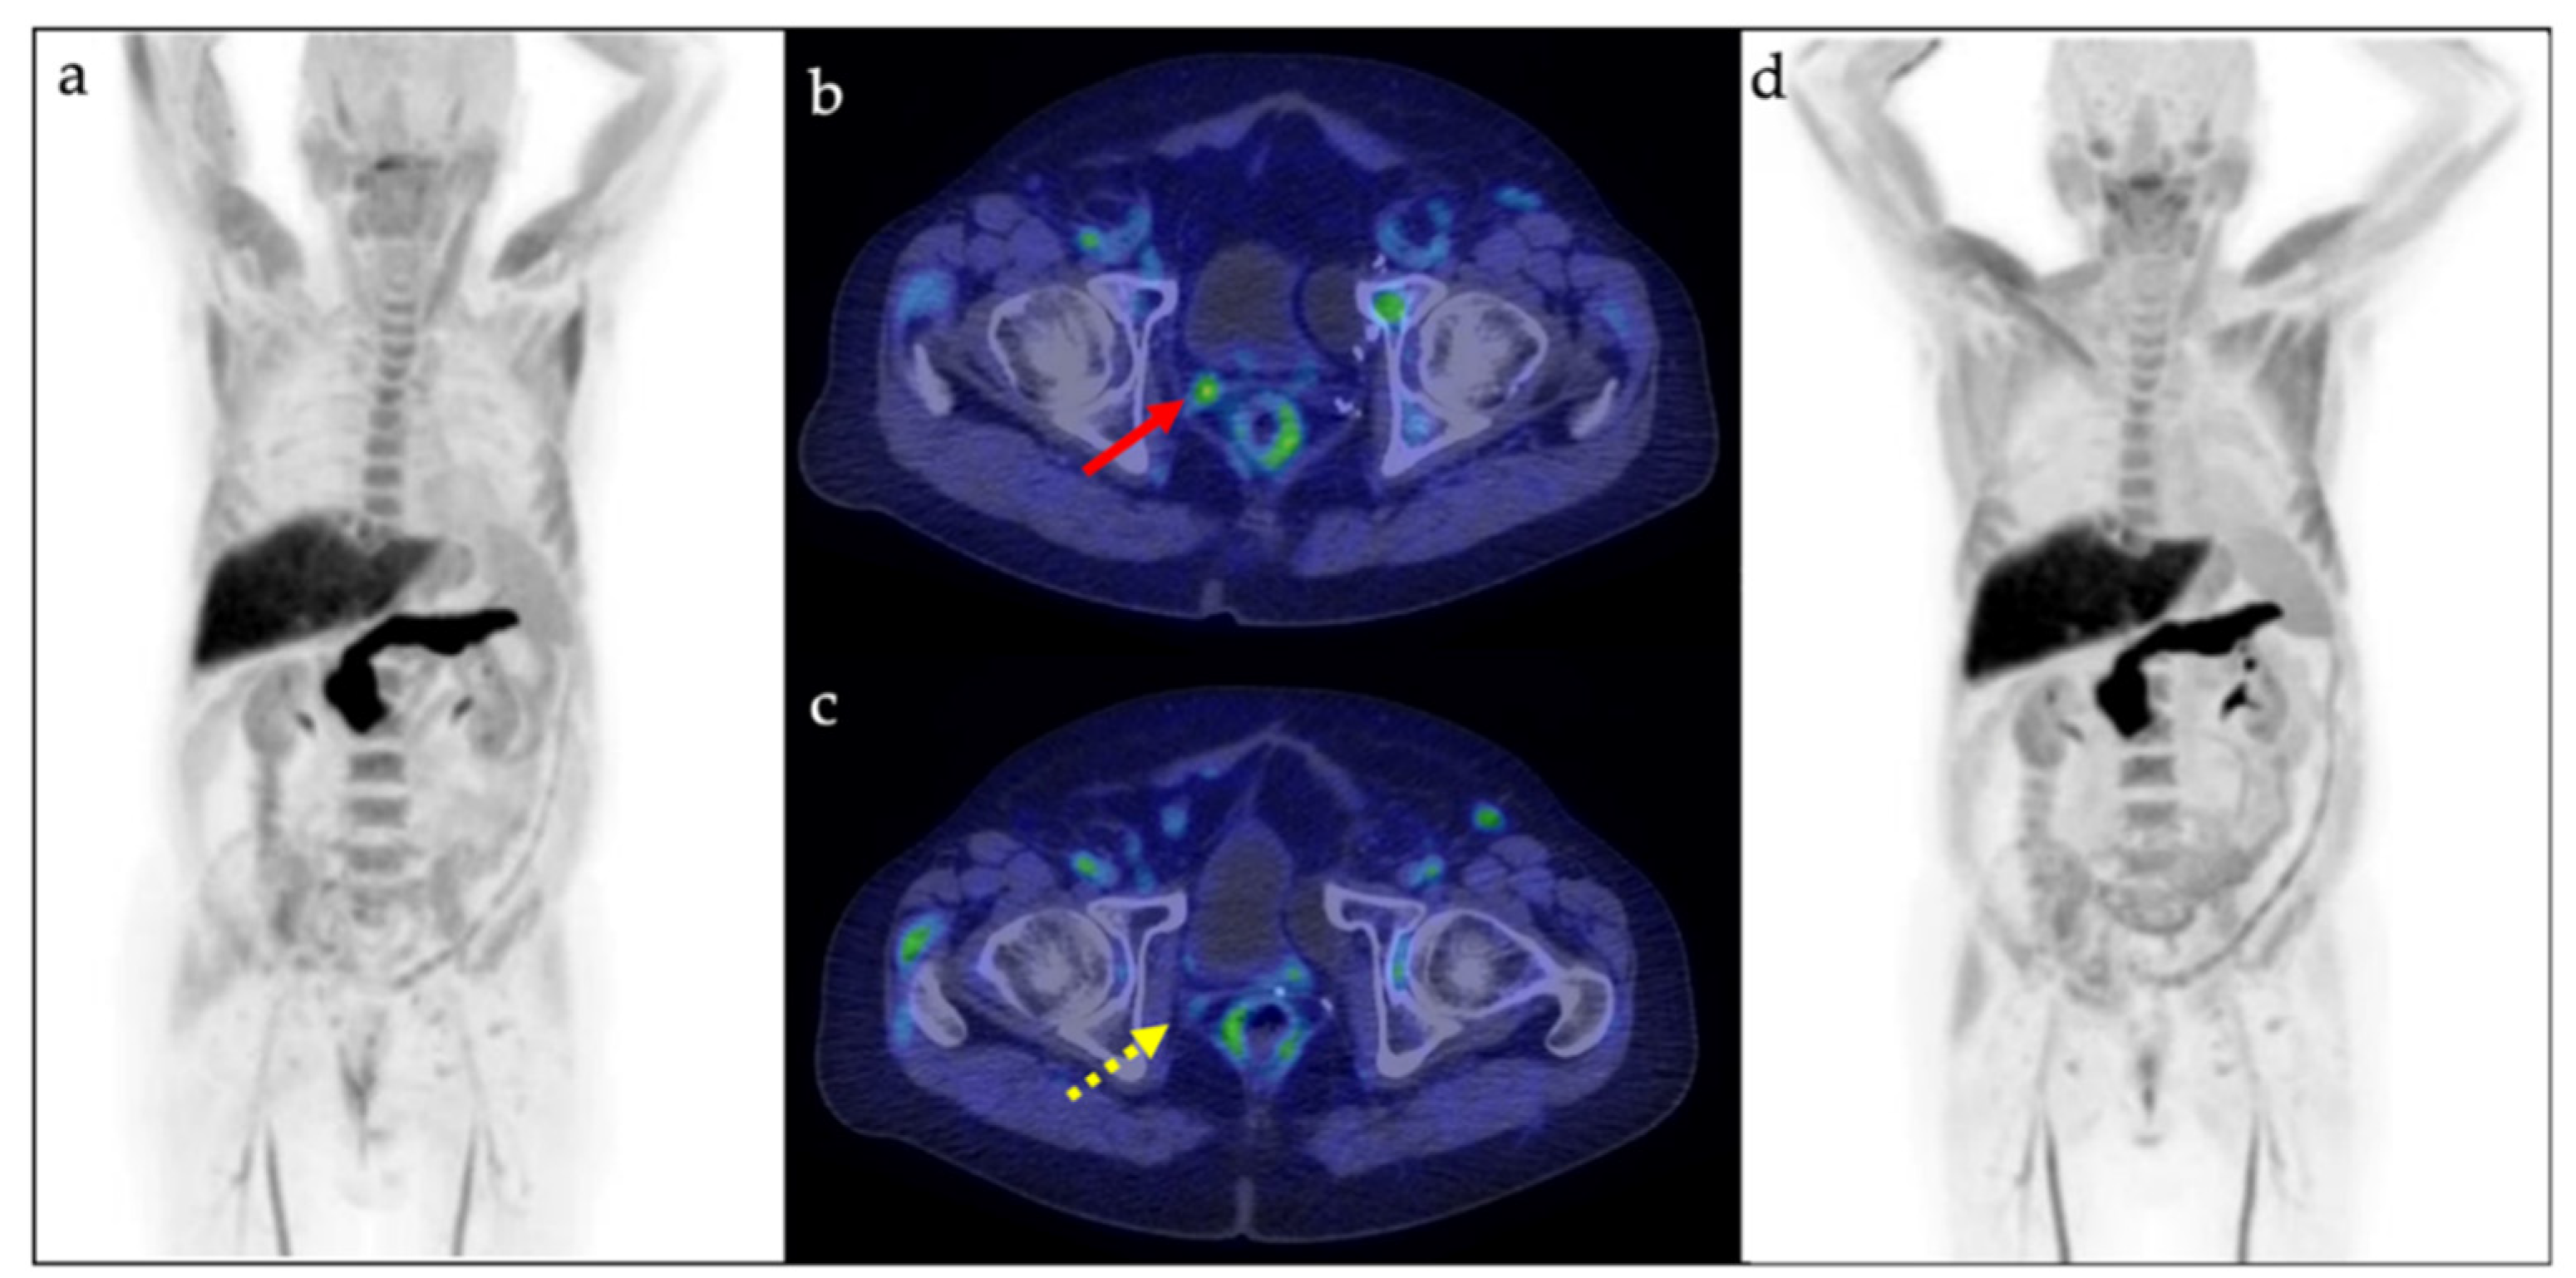 18F-fluciclovine-PET/CT imaging versus conventional imaging alone to guide  postprostatectomy salvage radiotherapy for prostate cancer (EMPIRE-1): a  single centre, open-label, phase 2/3 randomised controlled trial - The  Lancet